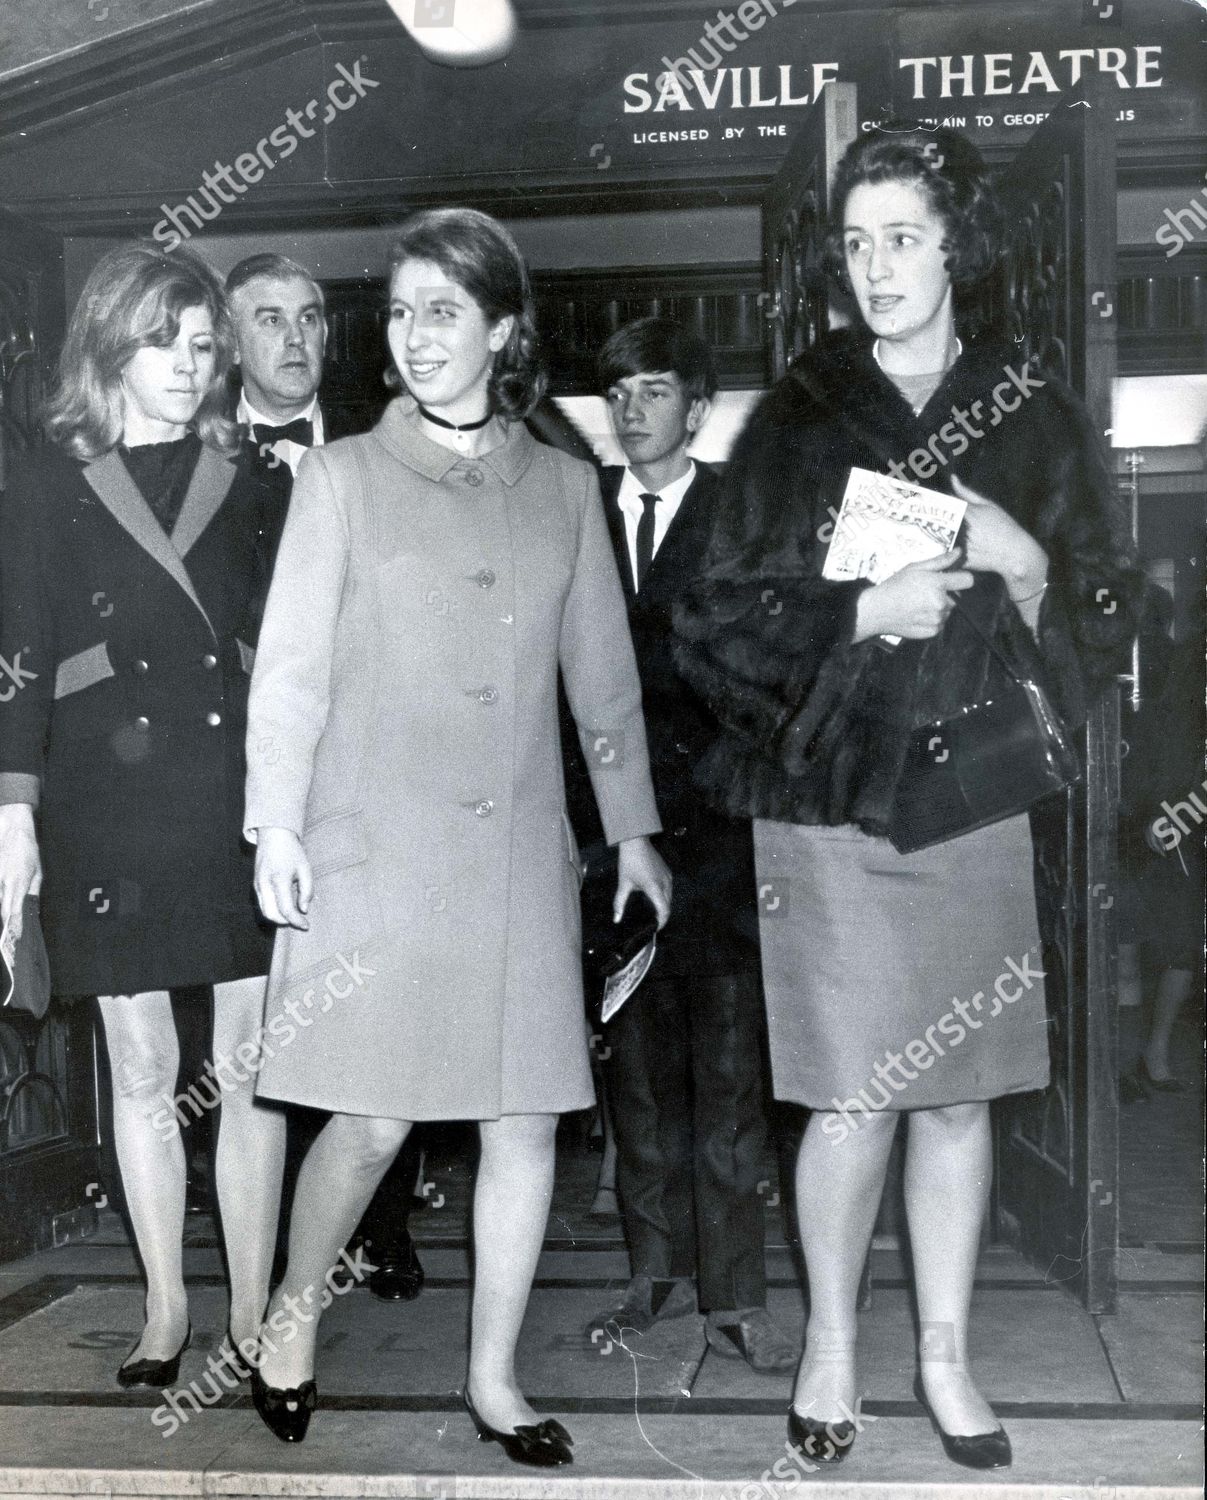 princess-anne-now-princess-royal-december-1967-princess-anne-leaves-saville-theatre-tonight-with-marmaduke-hussey-left-rear-royalty-shutterstock-editorial-896277a.jpg